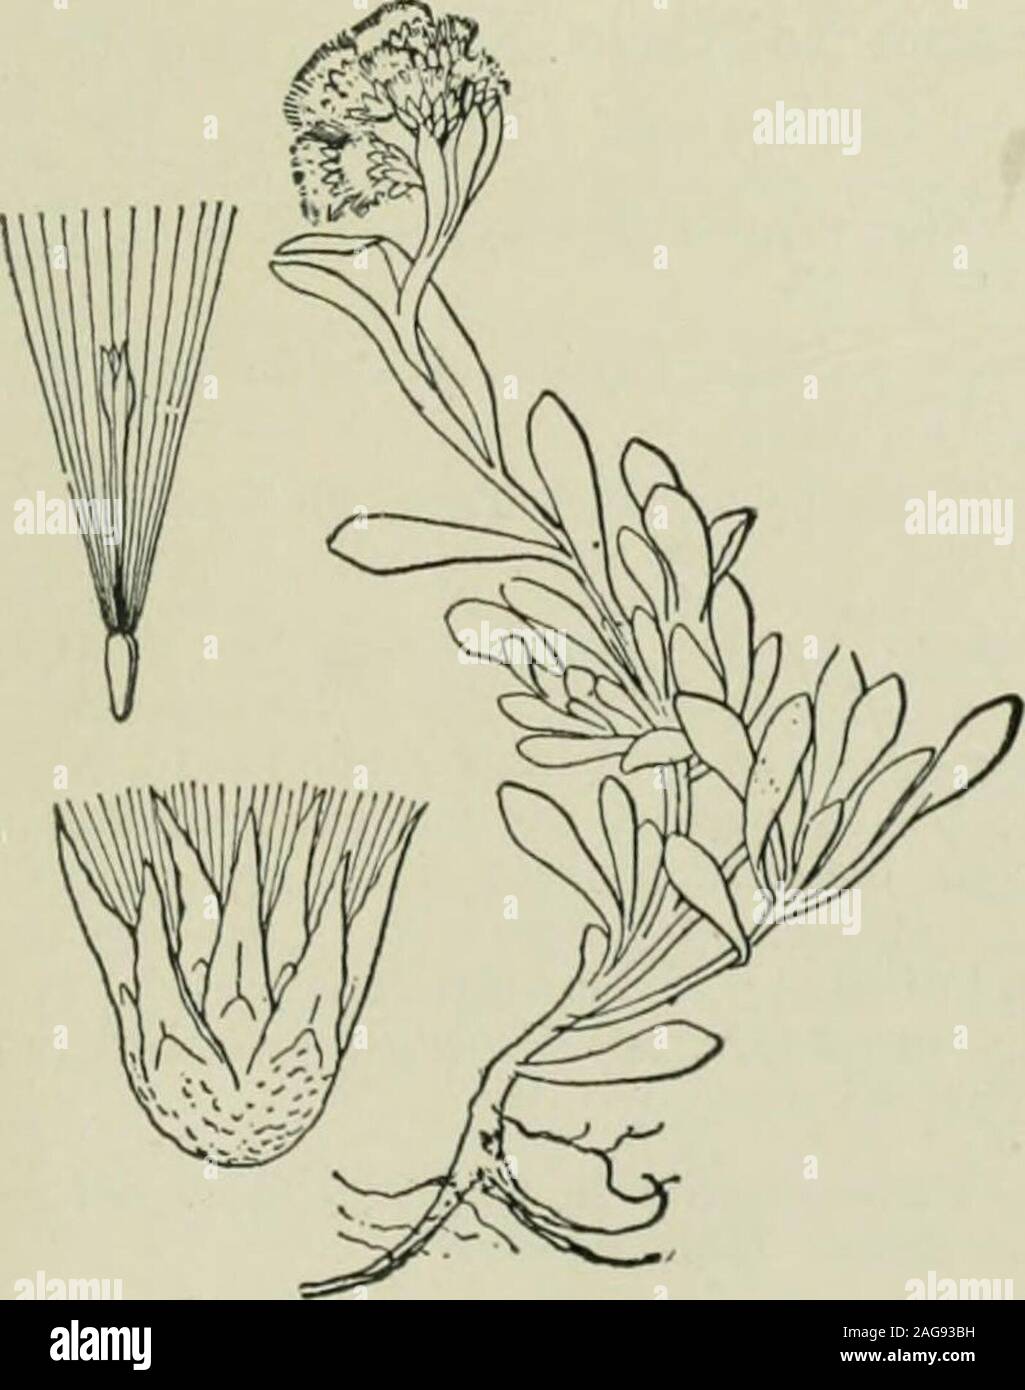 . An illustrated flora of the northern United States, Canada and the British possessions : from Newfoundland to the parallel of the southern boundary of Virginia and from the Atlantic Ocean westward to the 102nd meridian. 2. Antennaria alpina (L.) Gaertn. Alpine Everlasting. Fig. 4394- Gnaphalium alpinum L. Sp. PI. 856. i753- Antennaria alpina Gaertn. Fr. & Sem. 2: 410. 1791. iA. labradorica Nutt. Trans. Am. Phil. Soc. (II) 7: 406.1841. A. angustata Greene, Pittonia 3: 284. 1898. Surculose by short stolons; stems floccose-woolly,i-4 high. Basal leaves usually numerous, tufted,spatulate or line Stock Photo